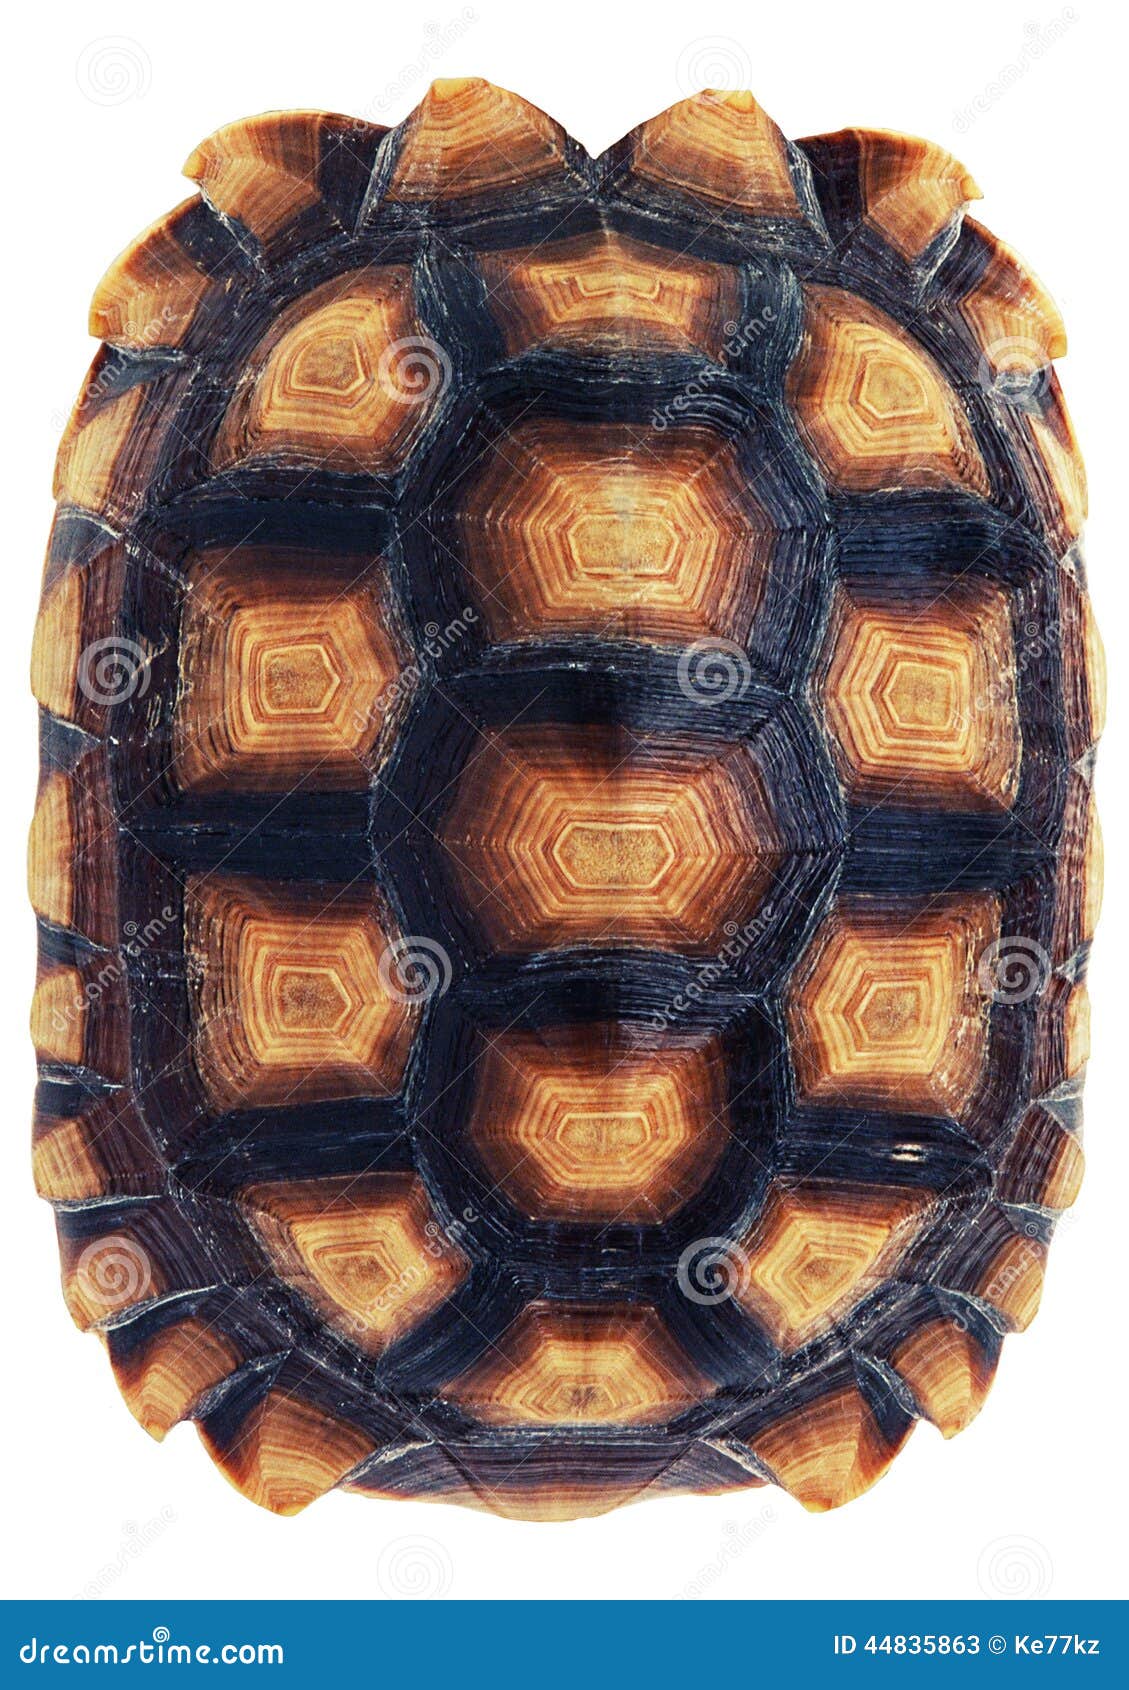 Tortoise Shell on a White Background. Stock Image - Image of